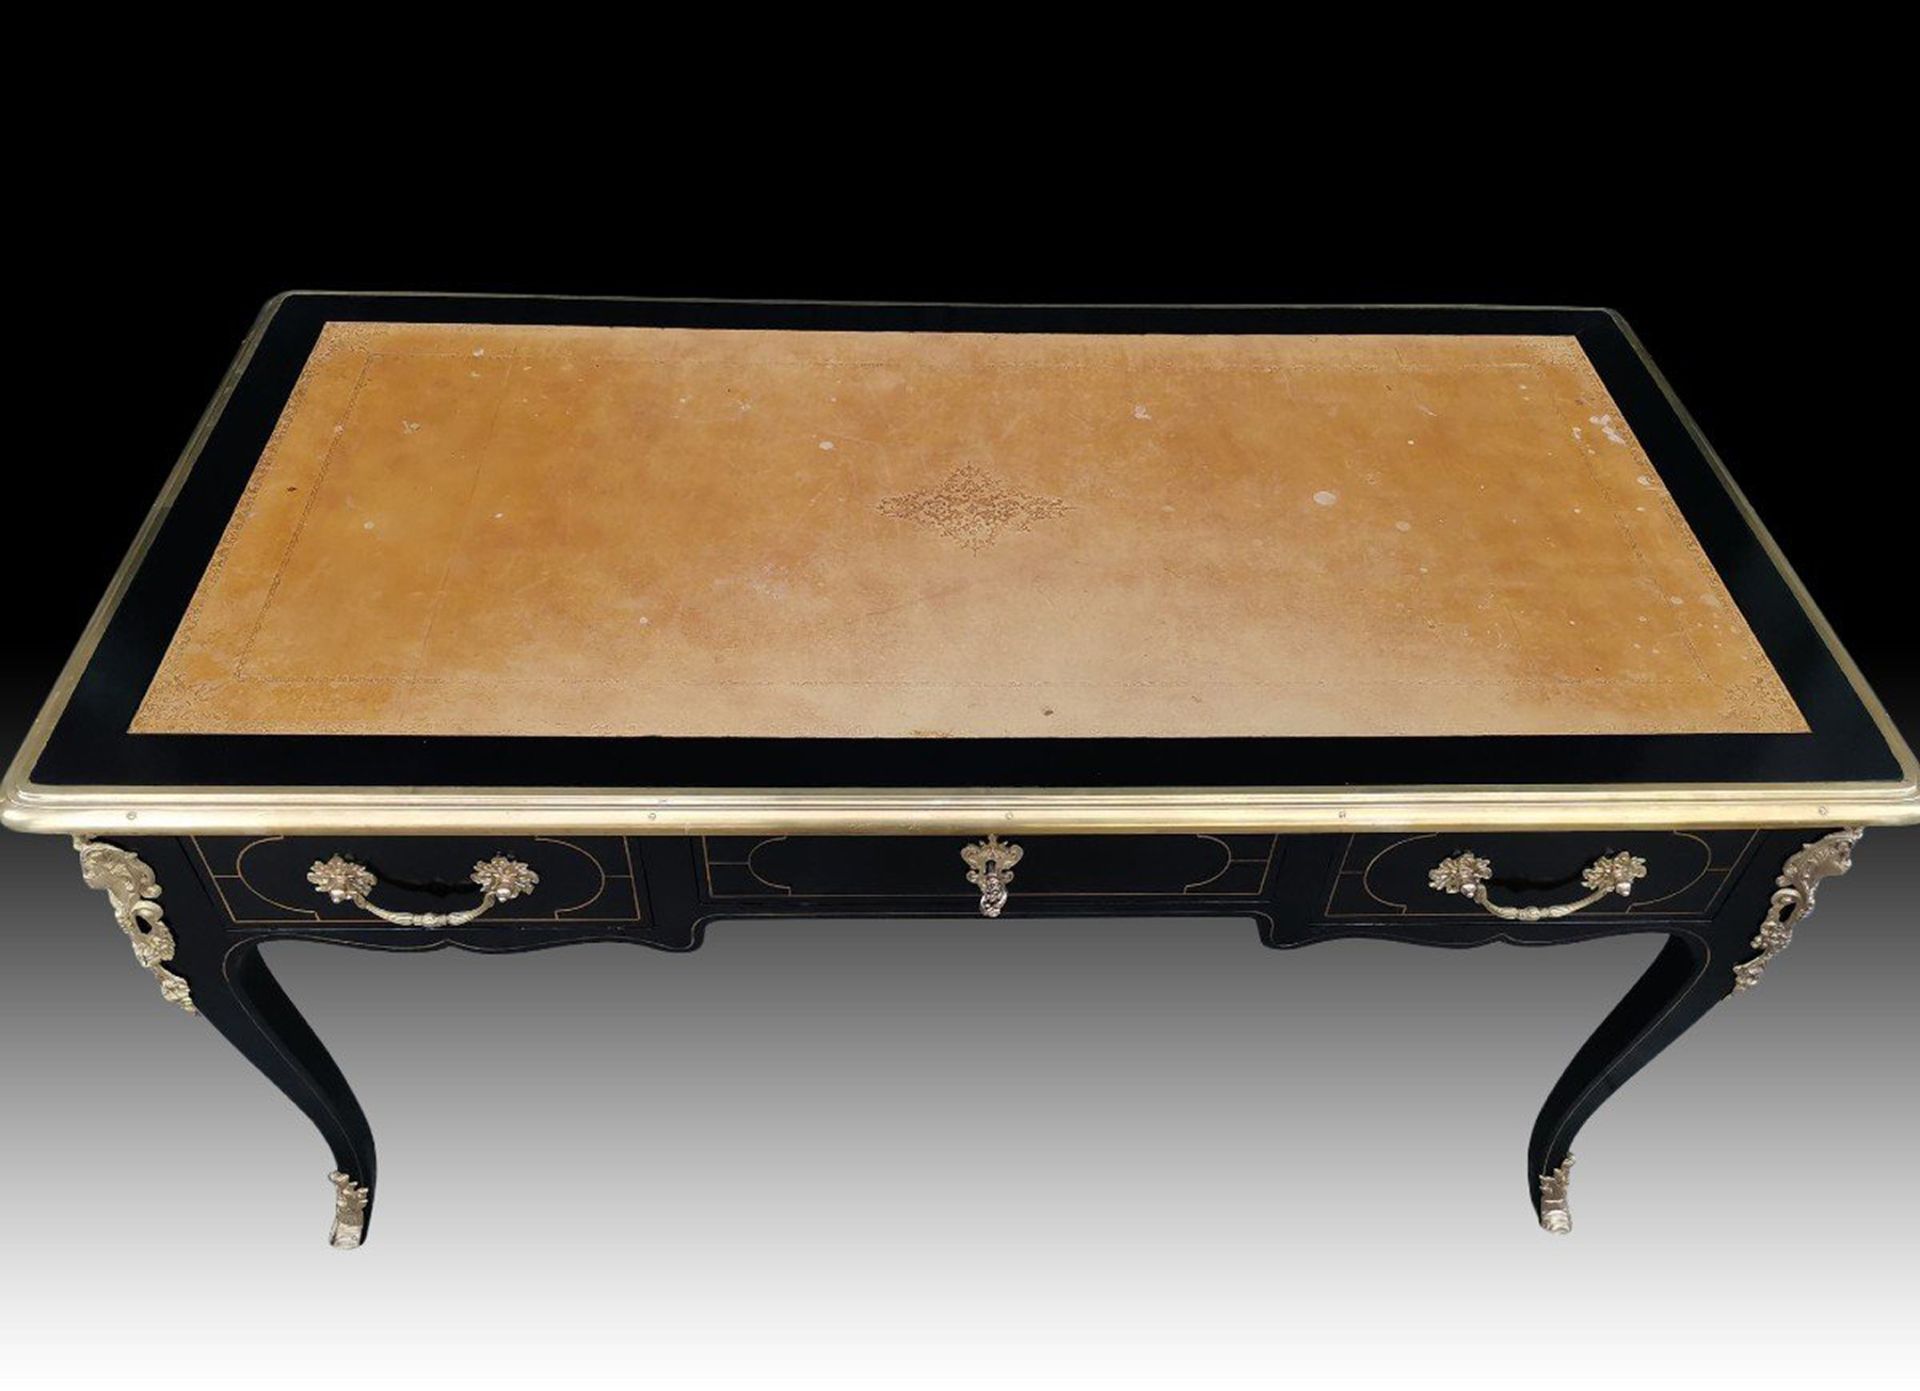 Large 19th century black lacquered Louis XV style writing desk - Image 2 of 4